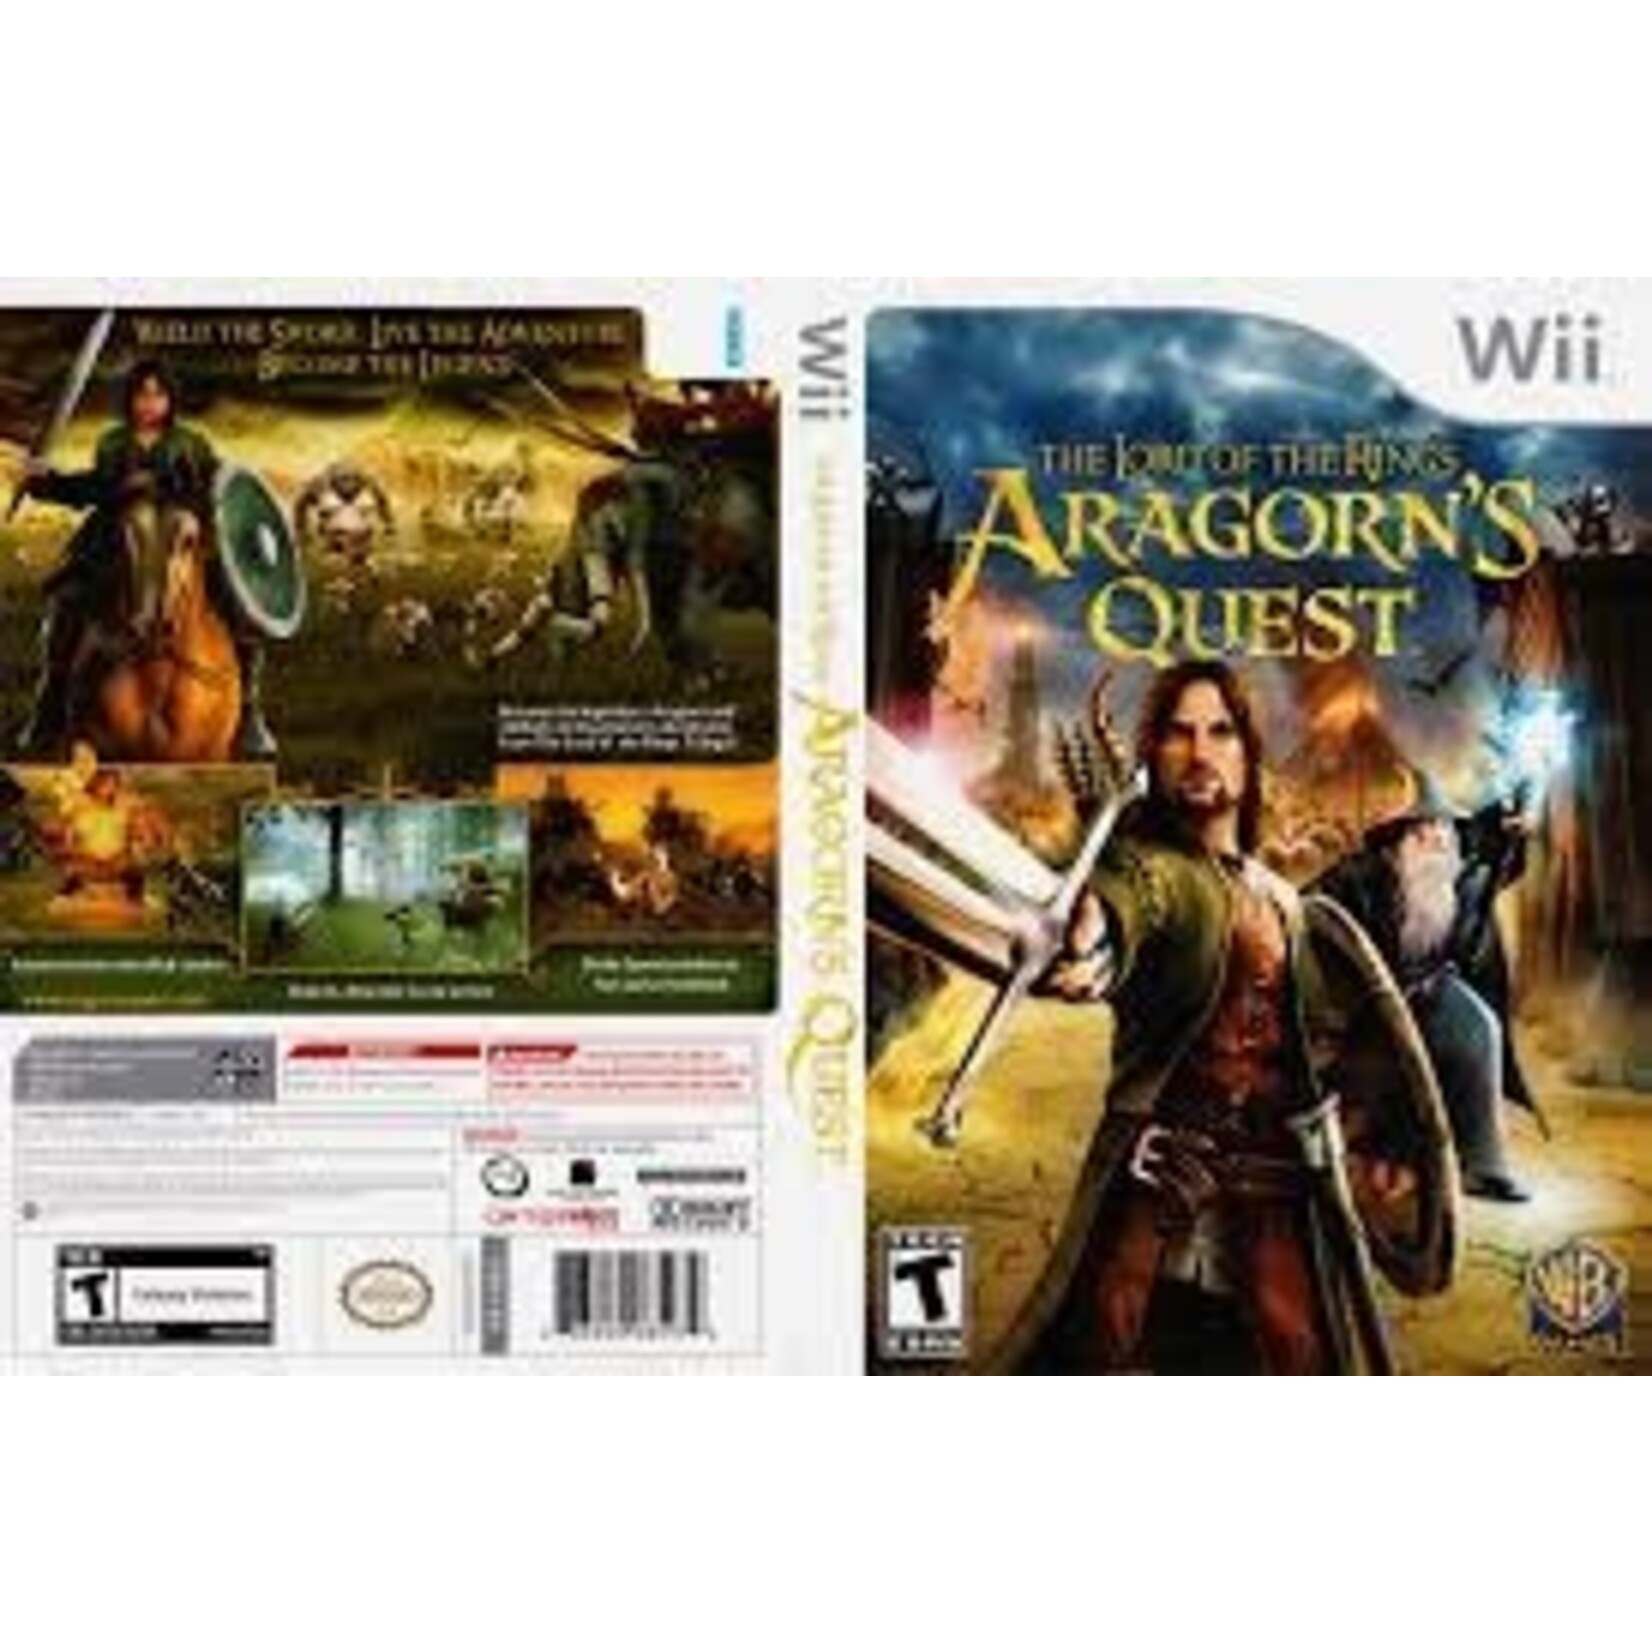 WIIUSD-Lord of the Rings Aragorn's Quest